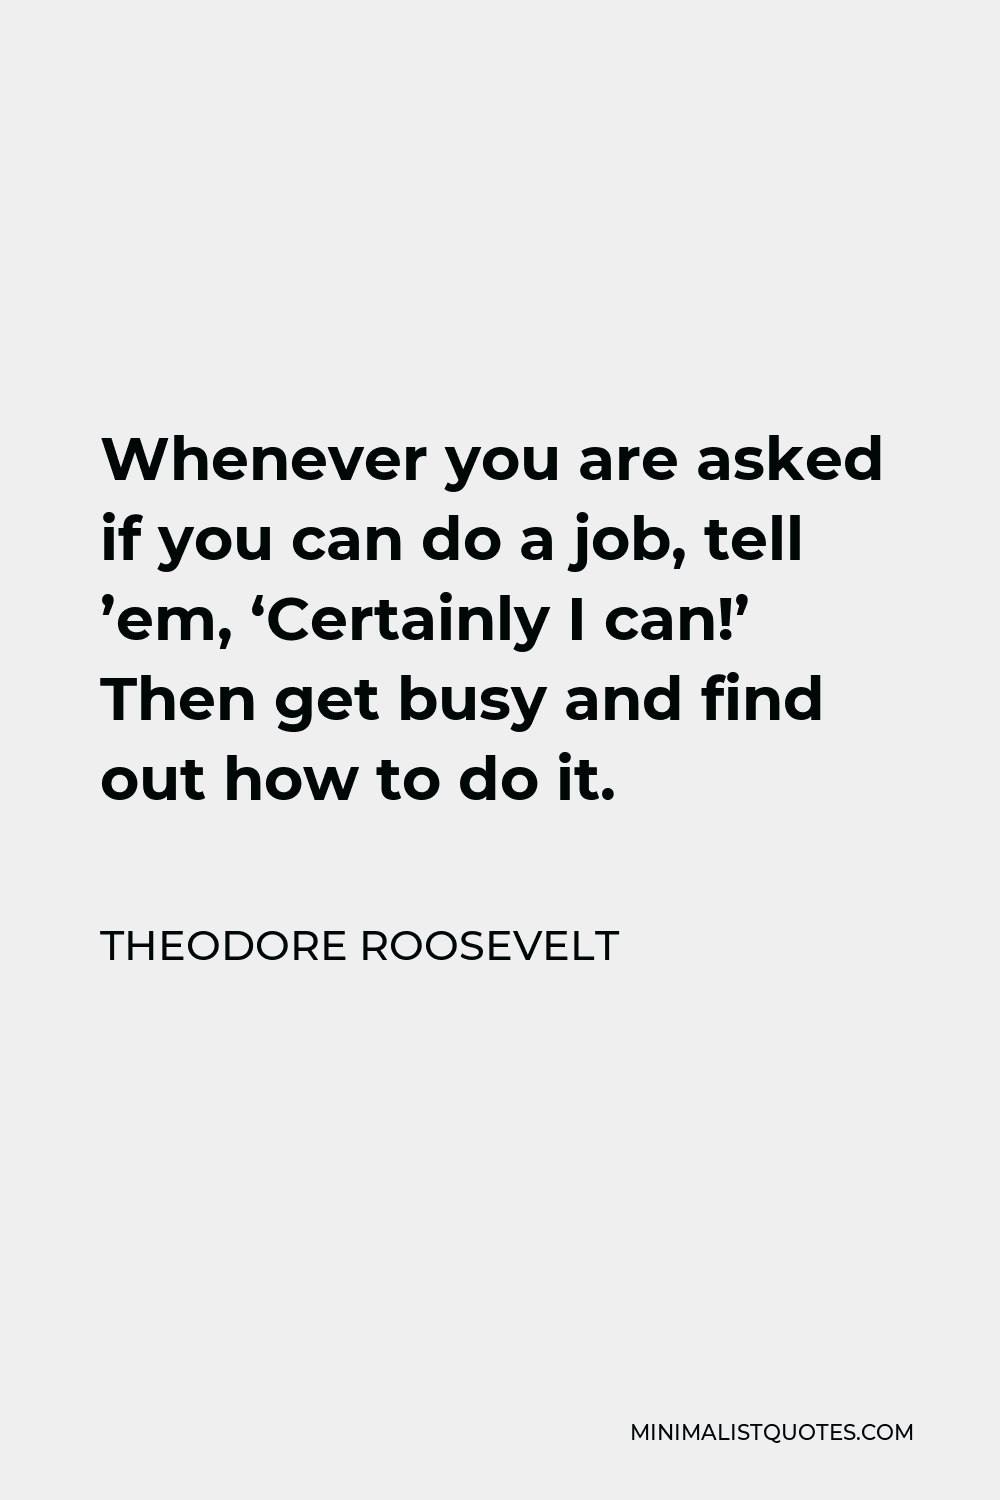 Theodore Roosevelt Quote - Whenever you are asked if you can do a job, tell ’em, ‘Certainly I can!’ Then get busy and find out how to do it.